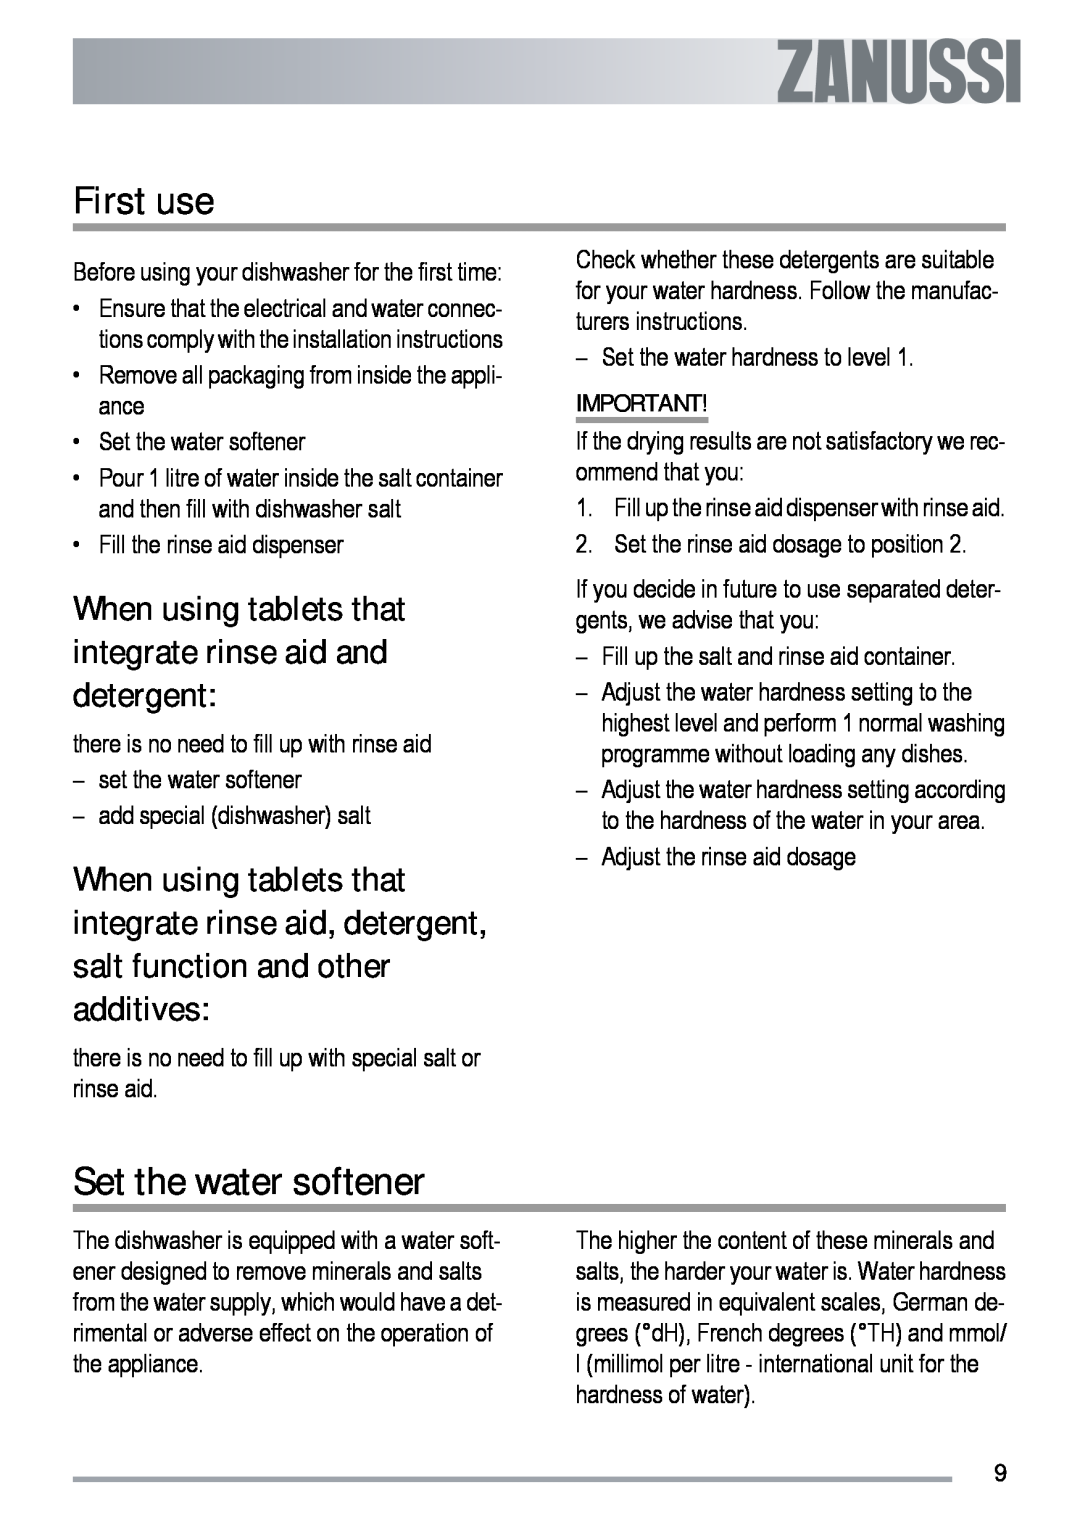 Zanussi ZDT 6454 user manual First use, Set the water softener 